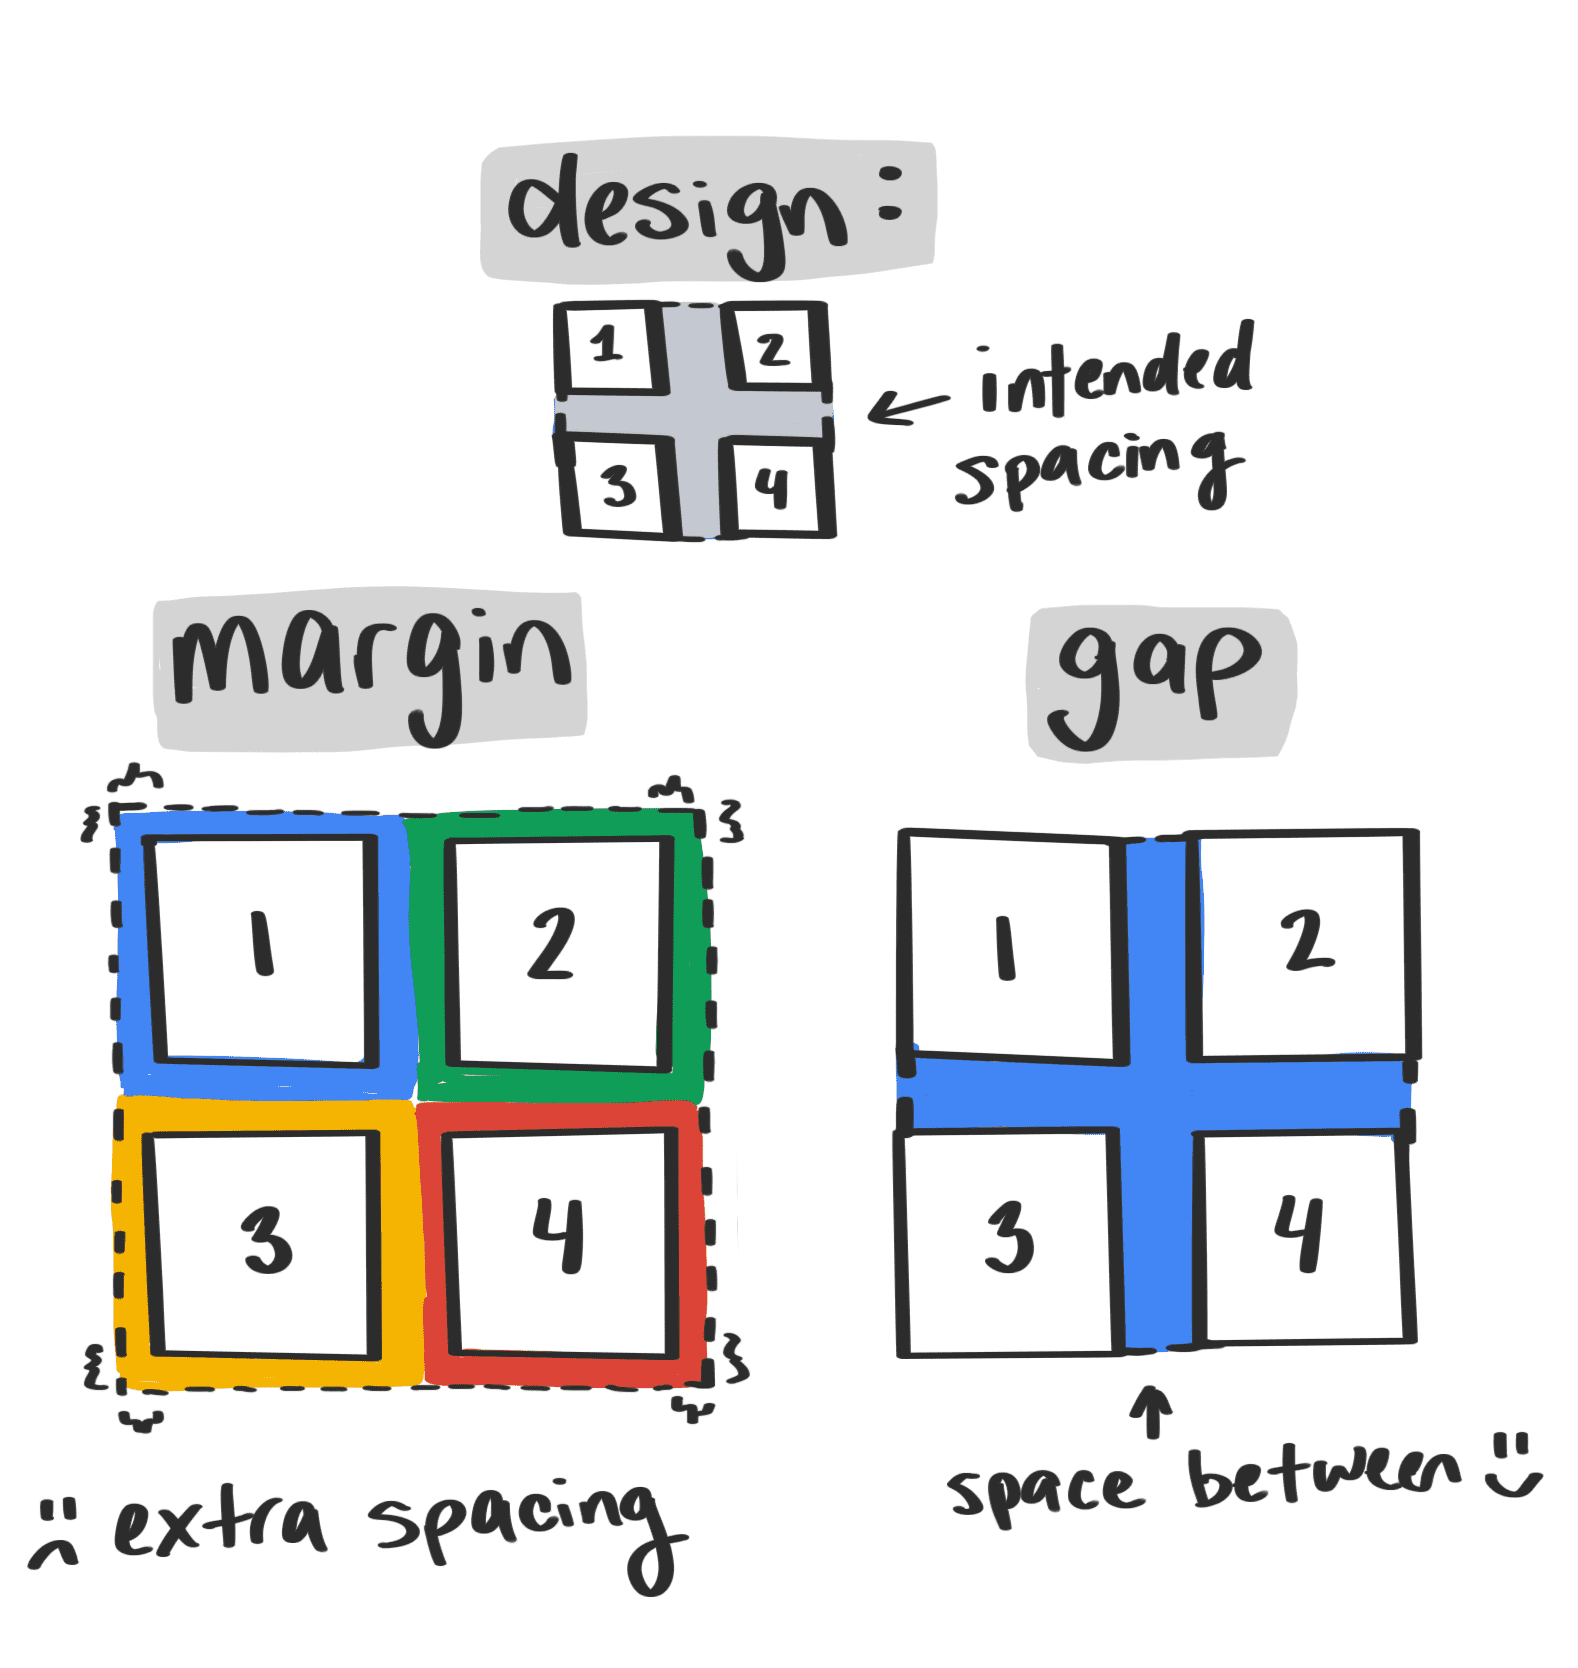 Illustration showing how the gap property avoids unintended spacing around edges of a container element.